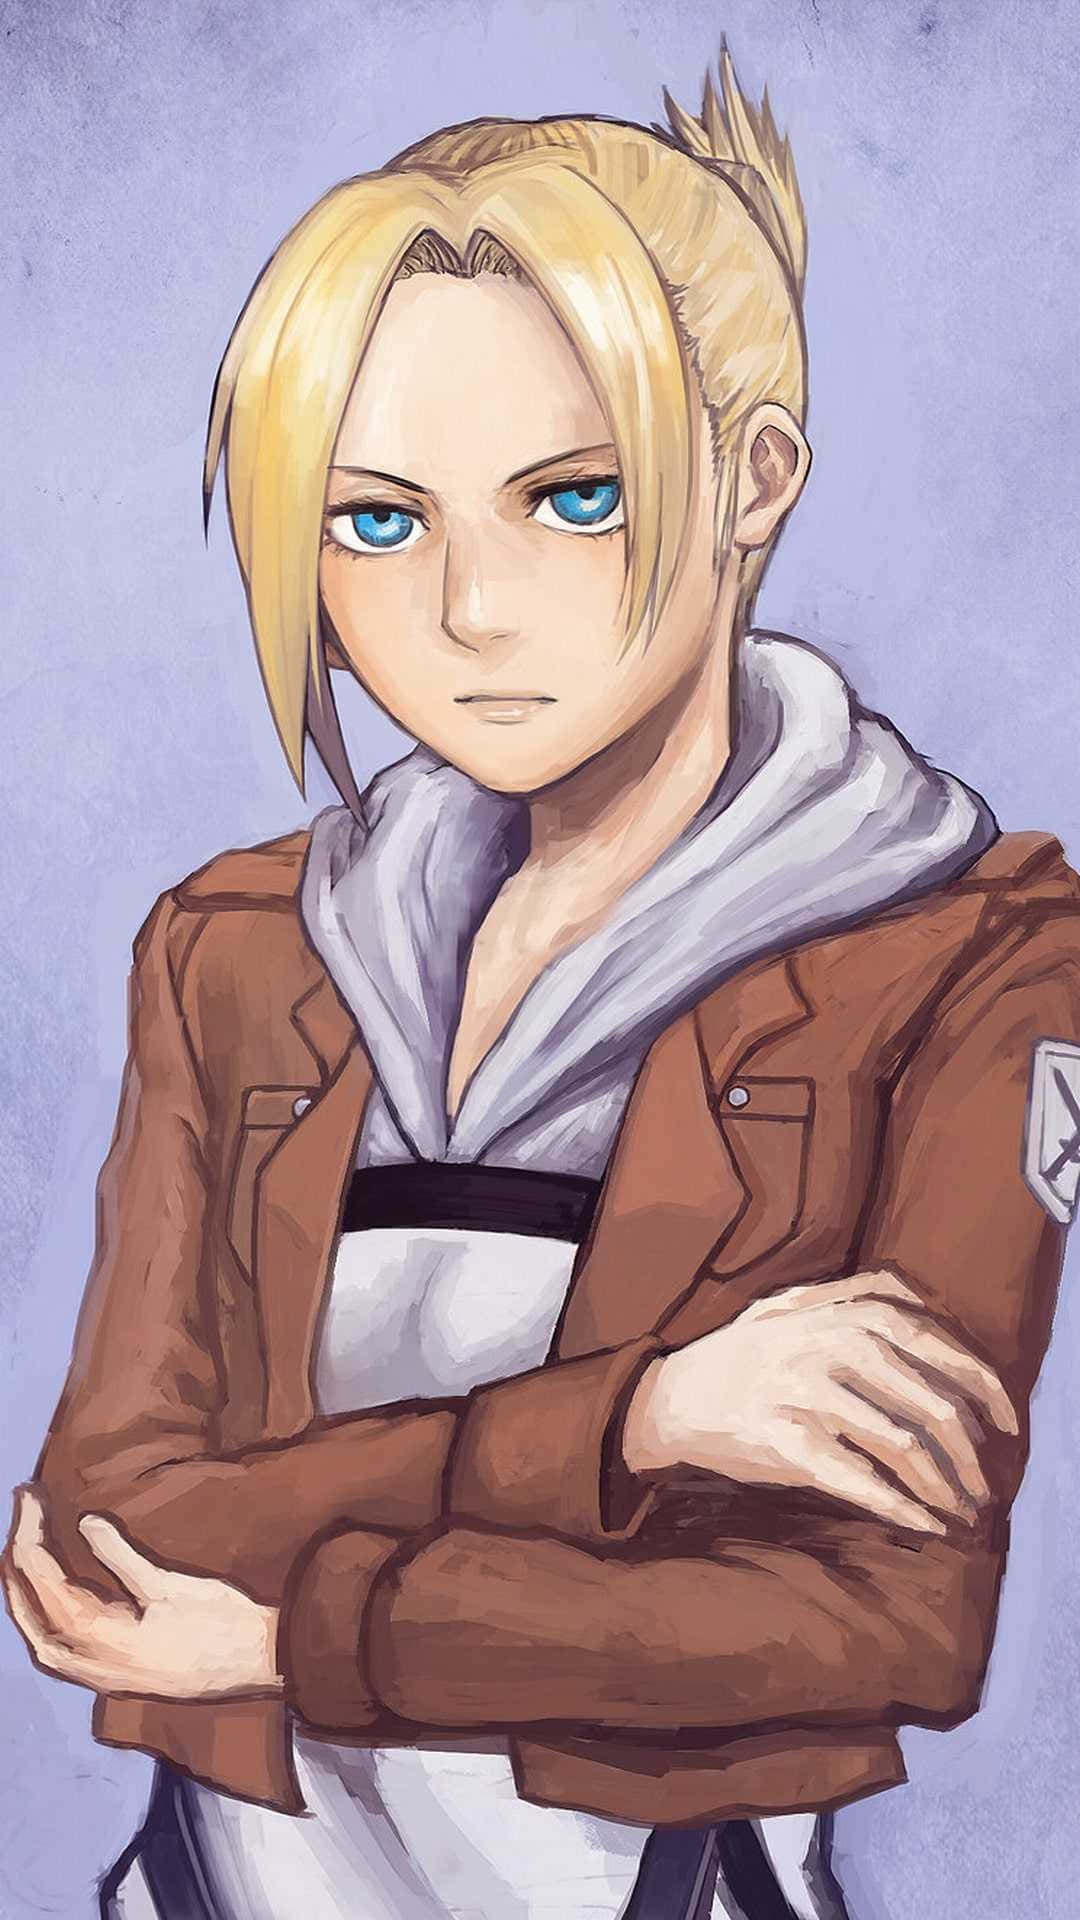 Annie Leonhart, the determined and resilient female protagonist of the popular anime Attack on Titan Wallpaper